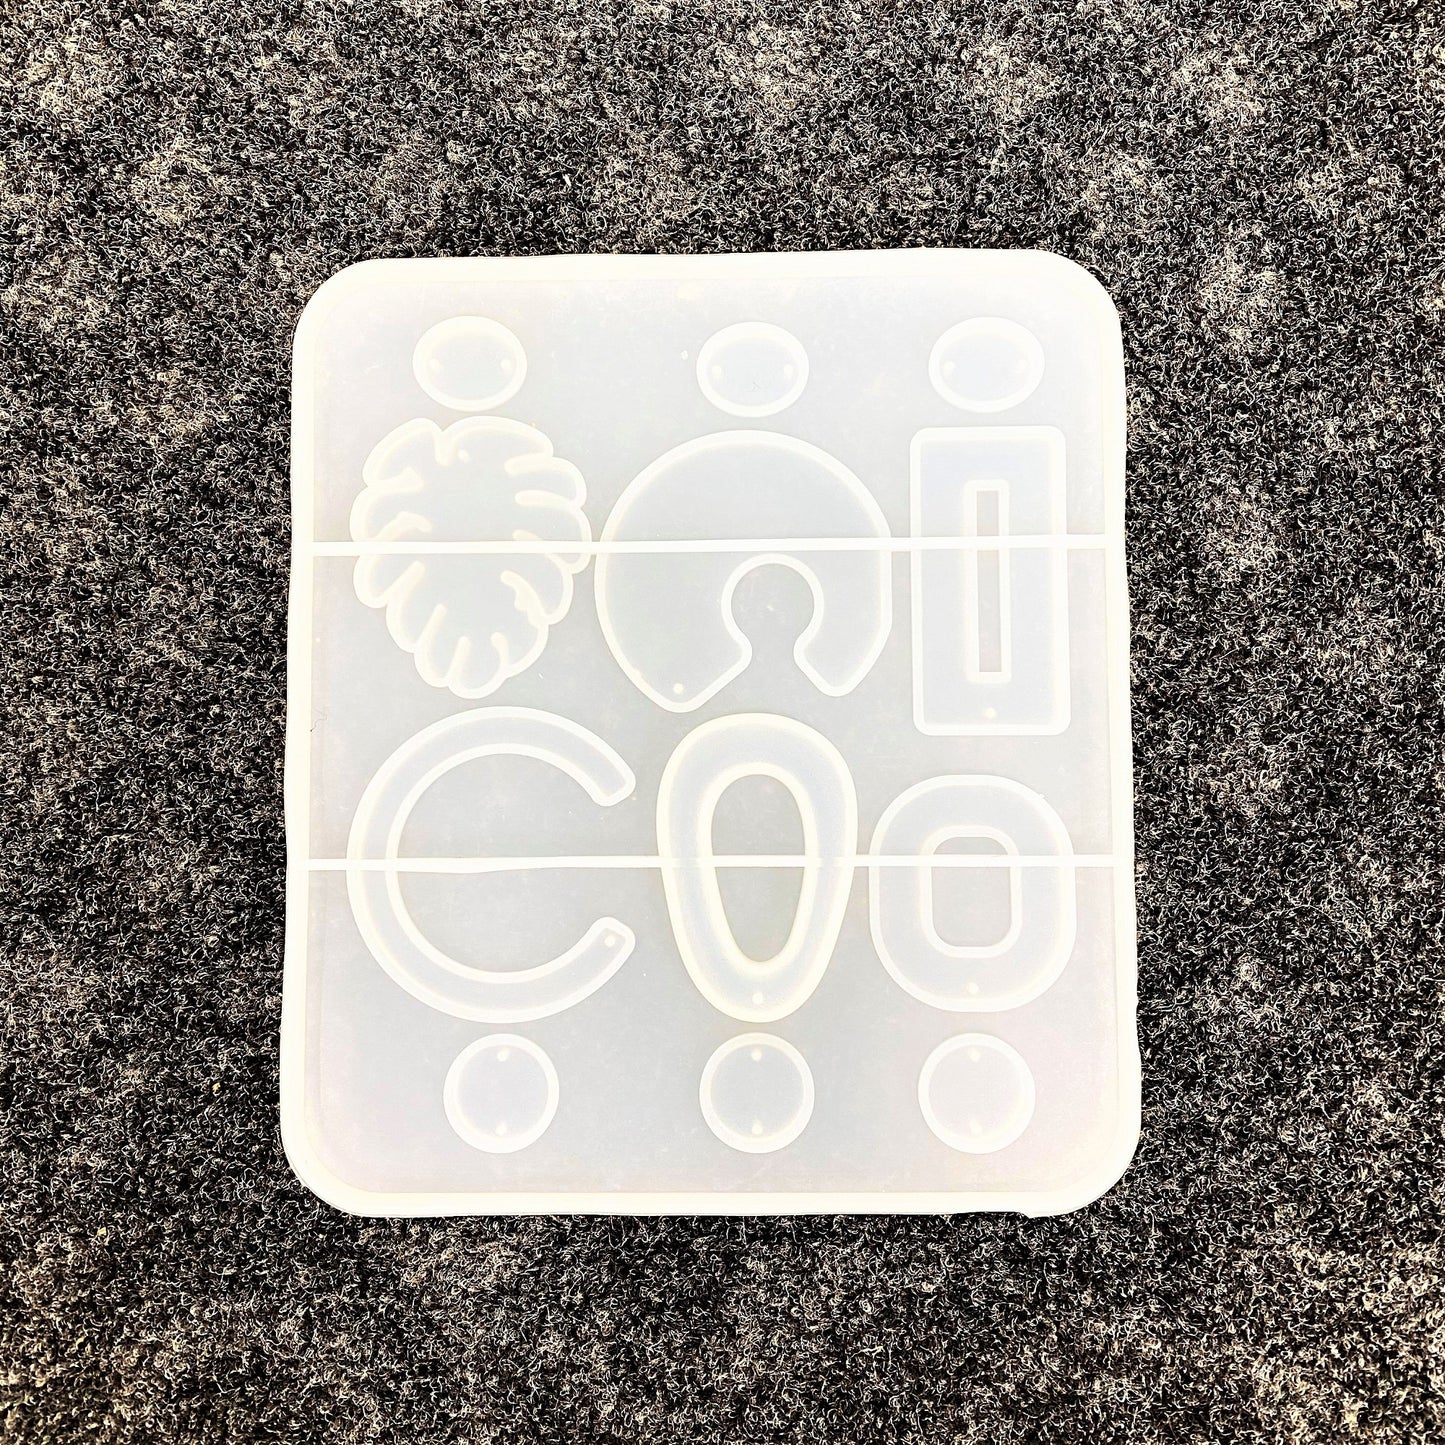 Silicon Molds for Epoxy Resin Objects